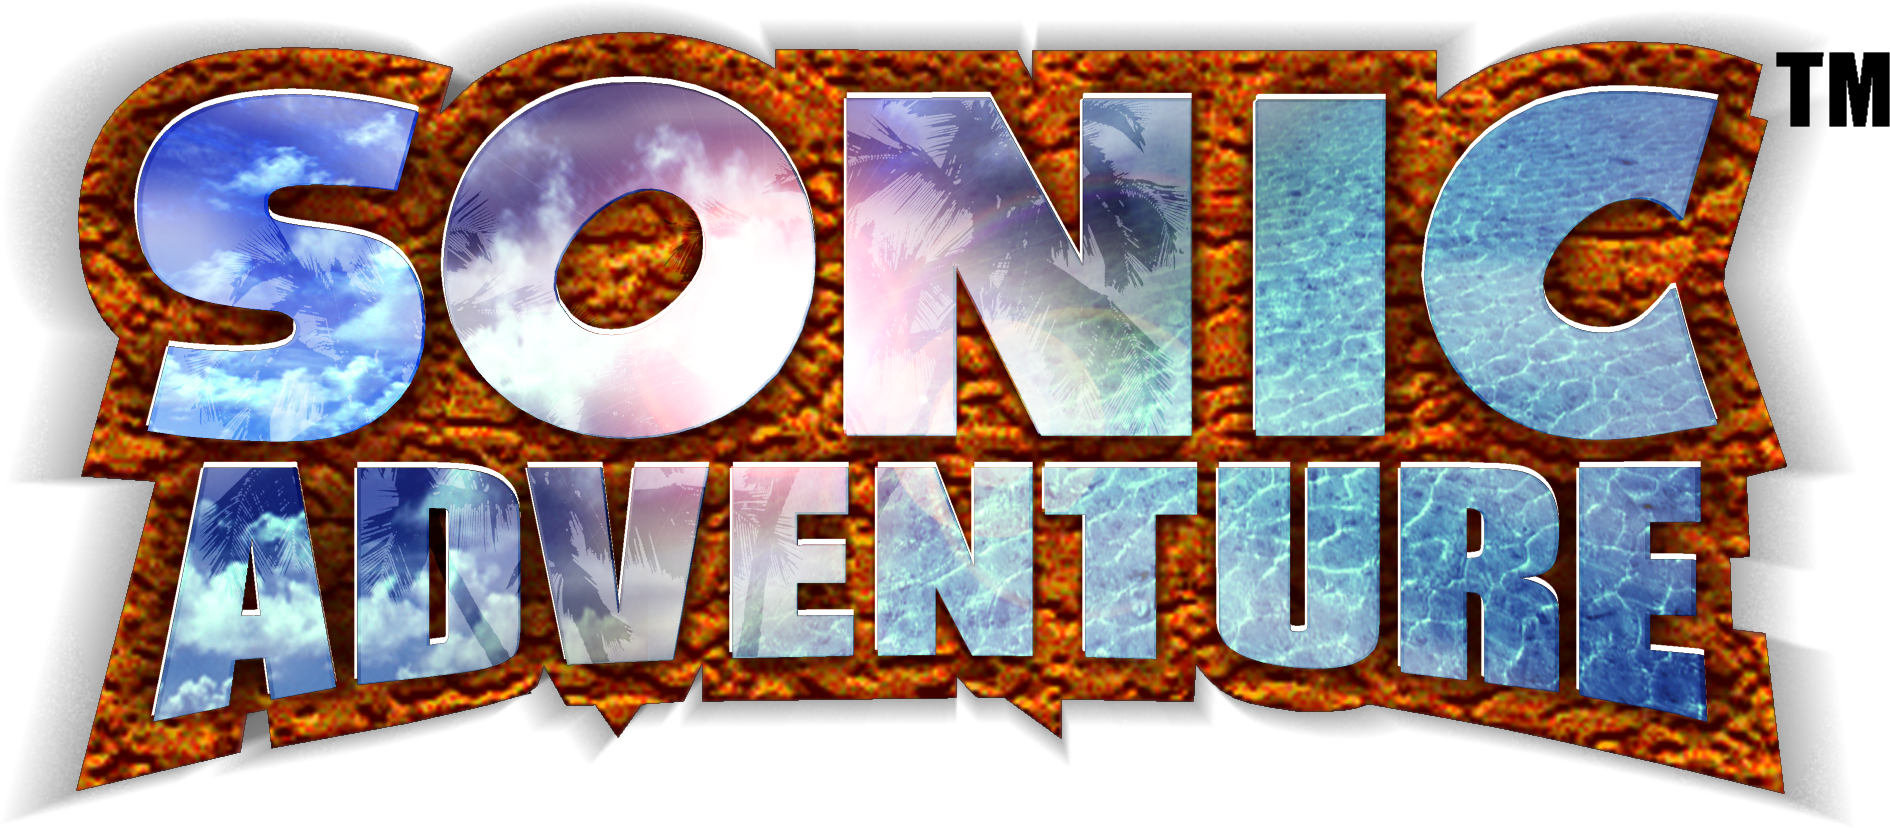 Adventure PNG Images With Transparent Background | Free Download On Lovepik